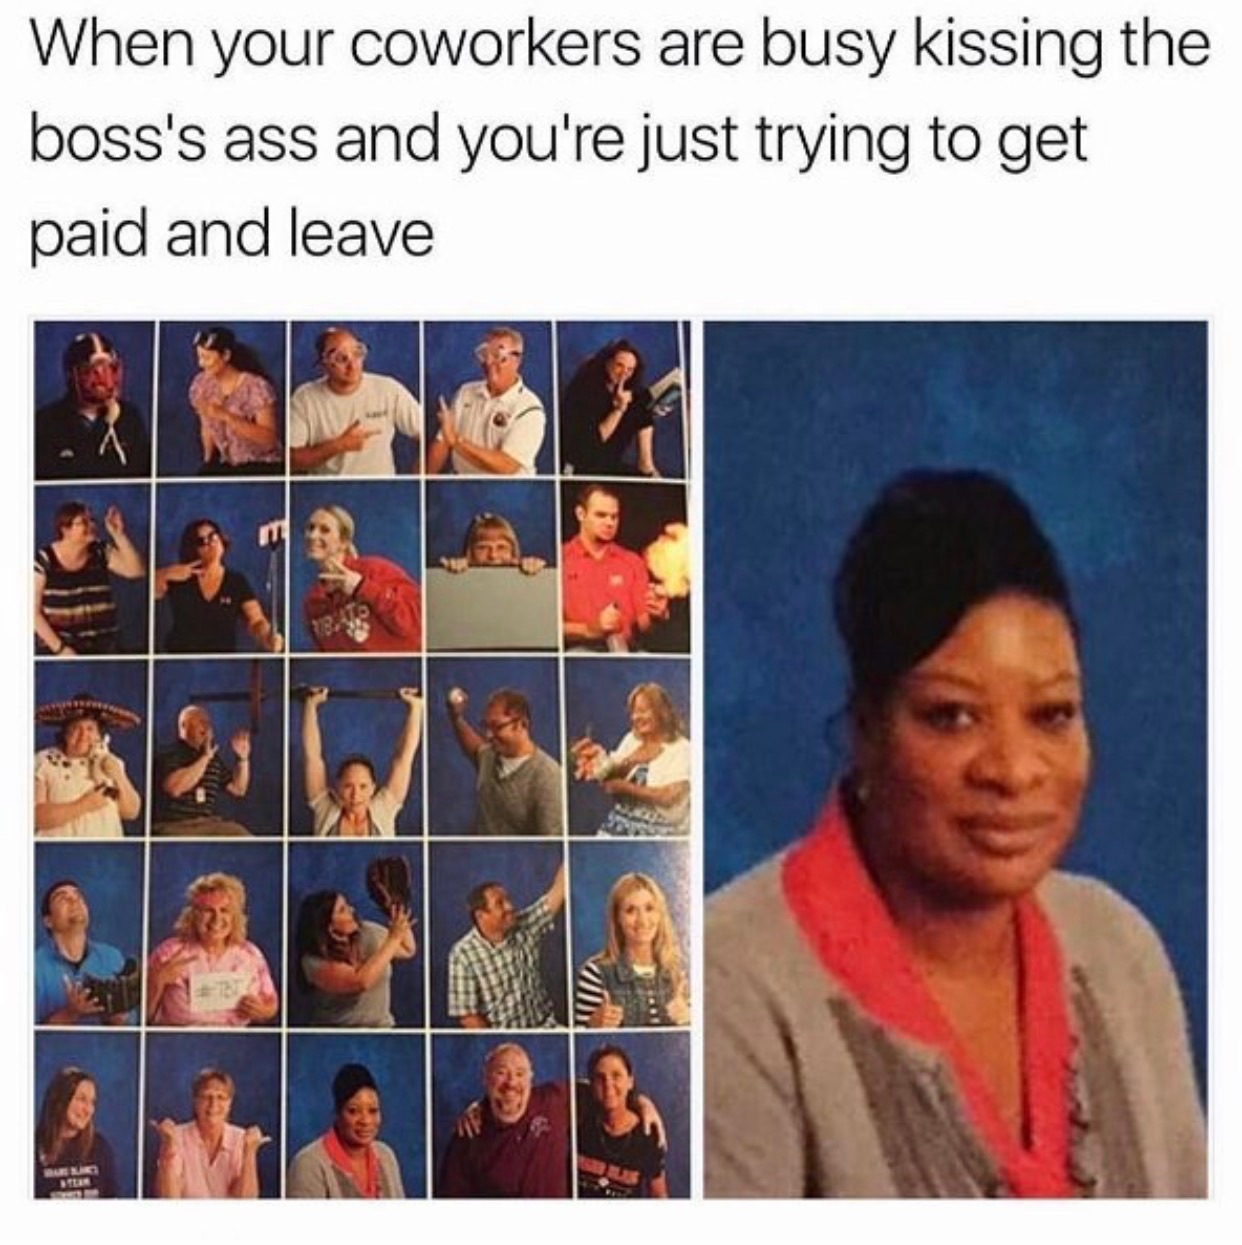 memes - human - When your coworkers are busy kissing the boss's ass and you're just trying to get paid and leave